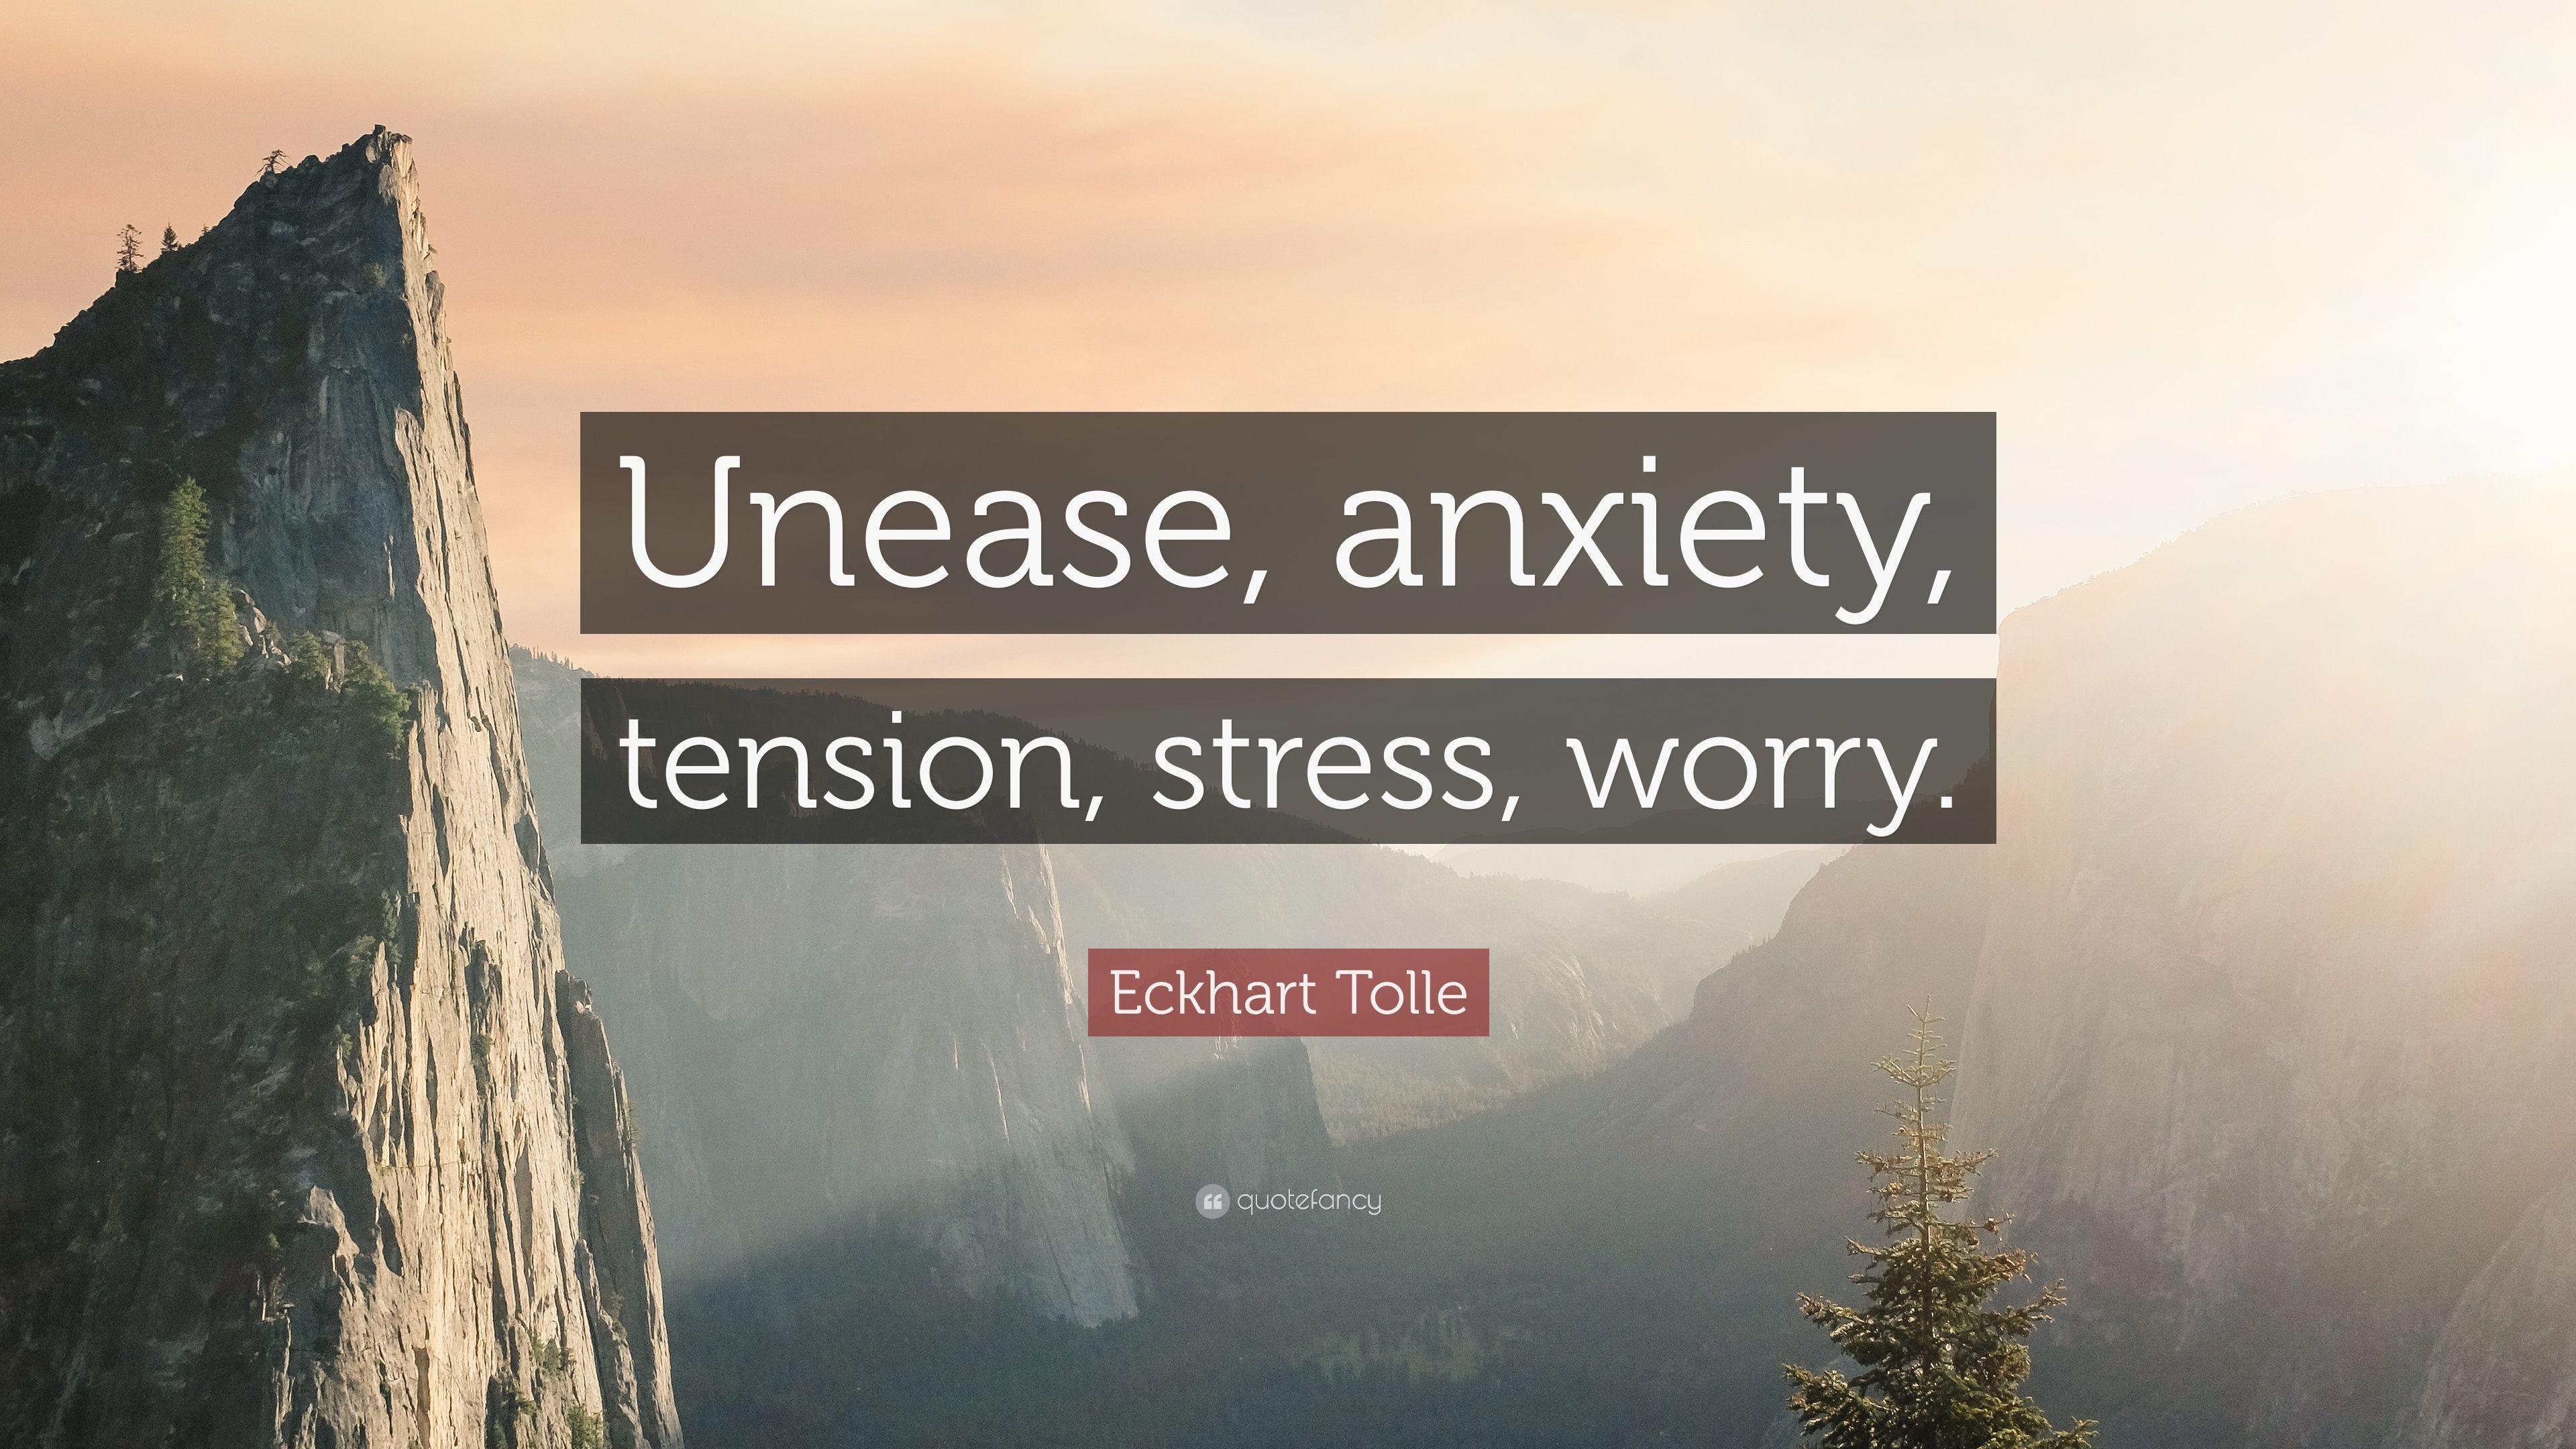 Eckhart Tolle Quote: “Unease, anxiety, tension, stress, worry.” 12